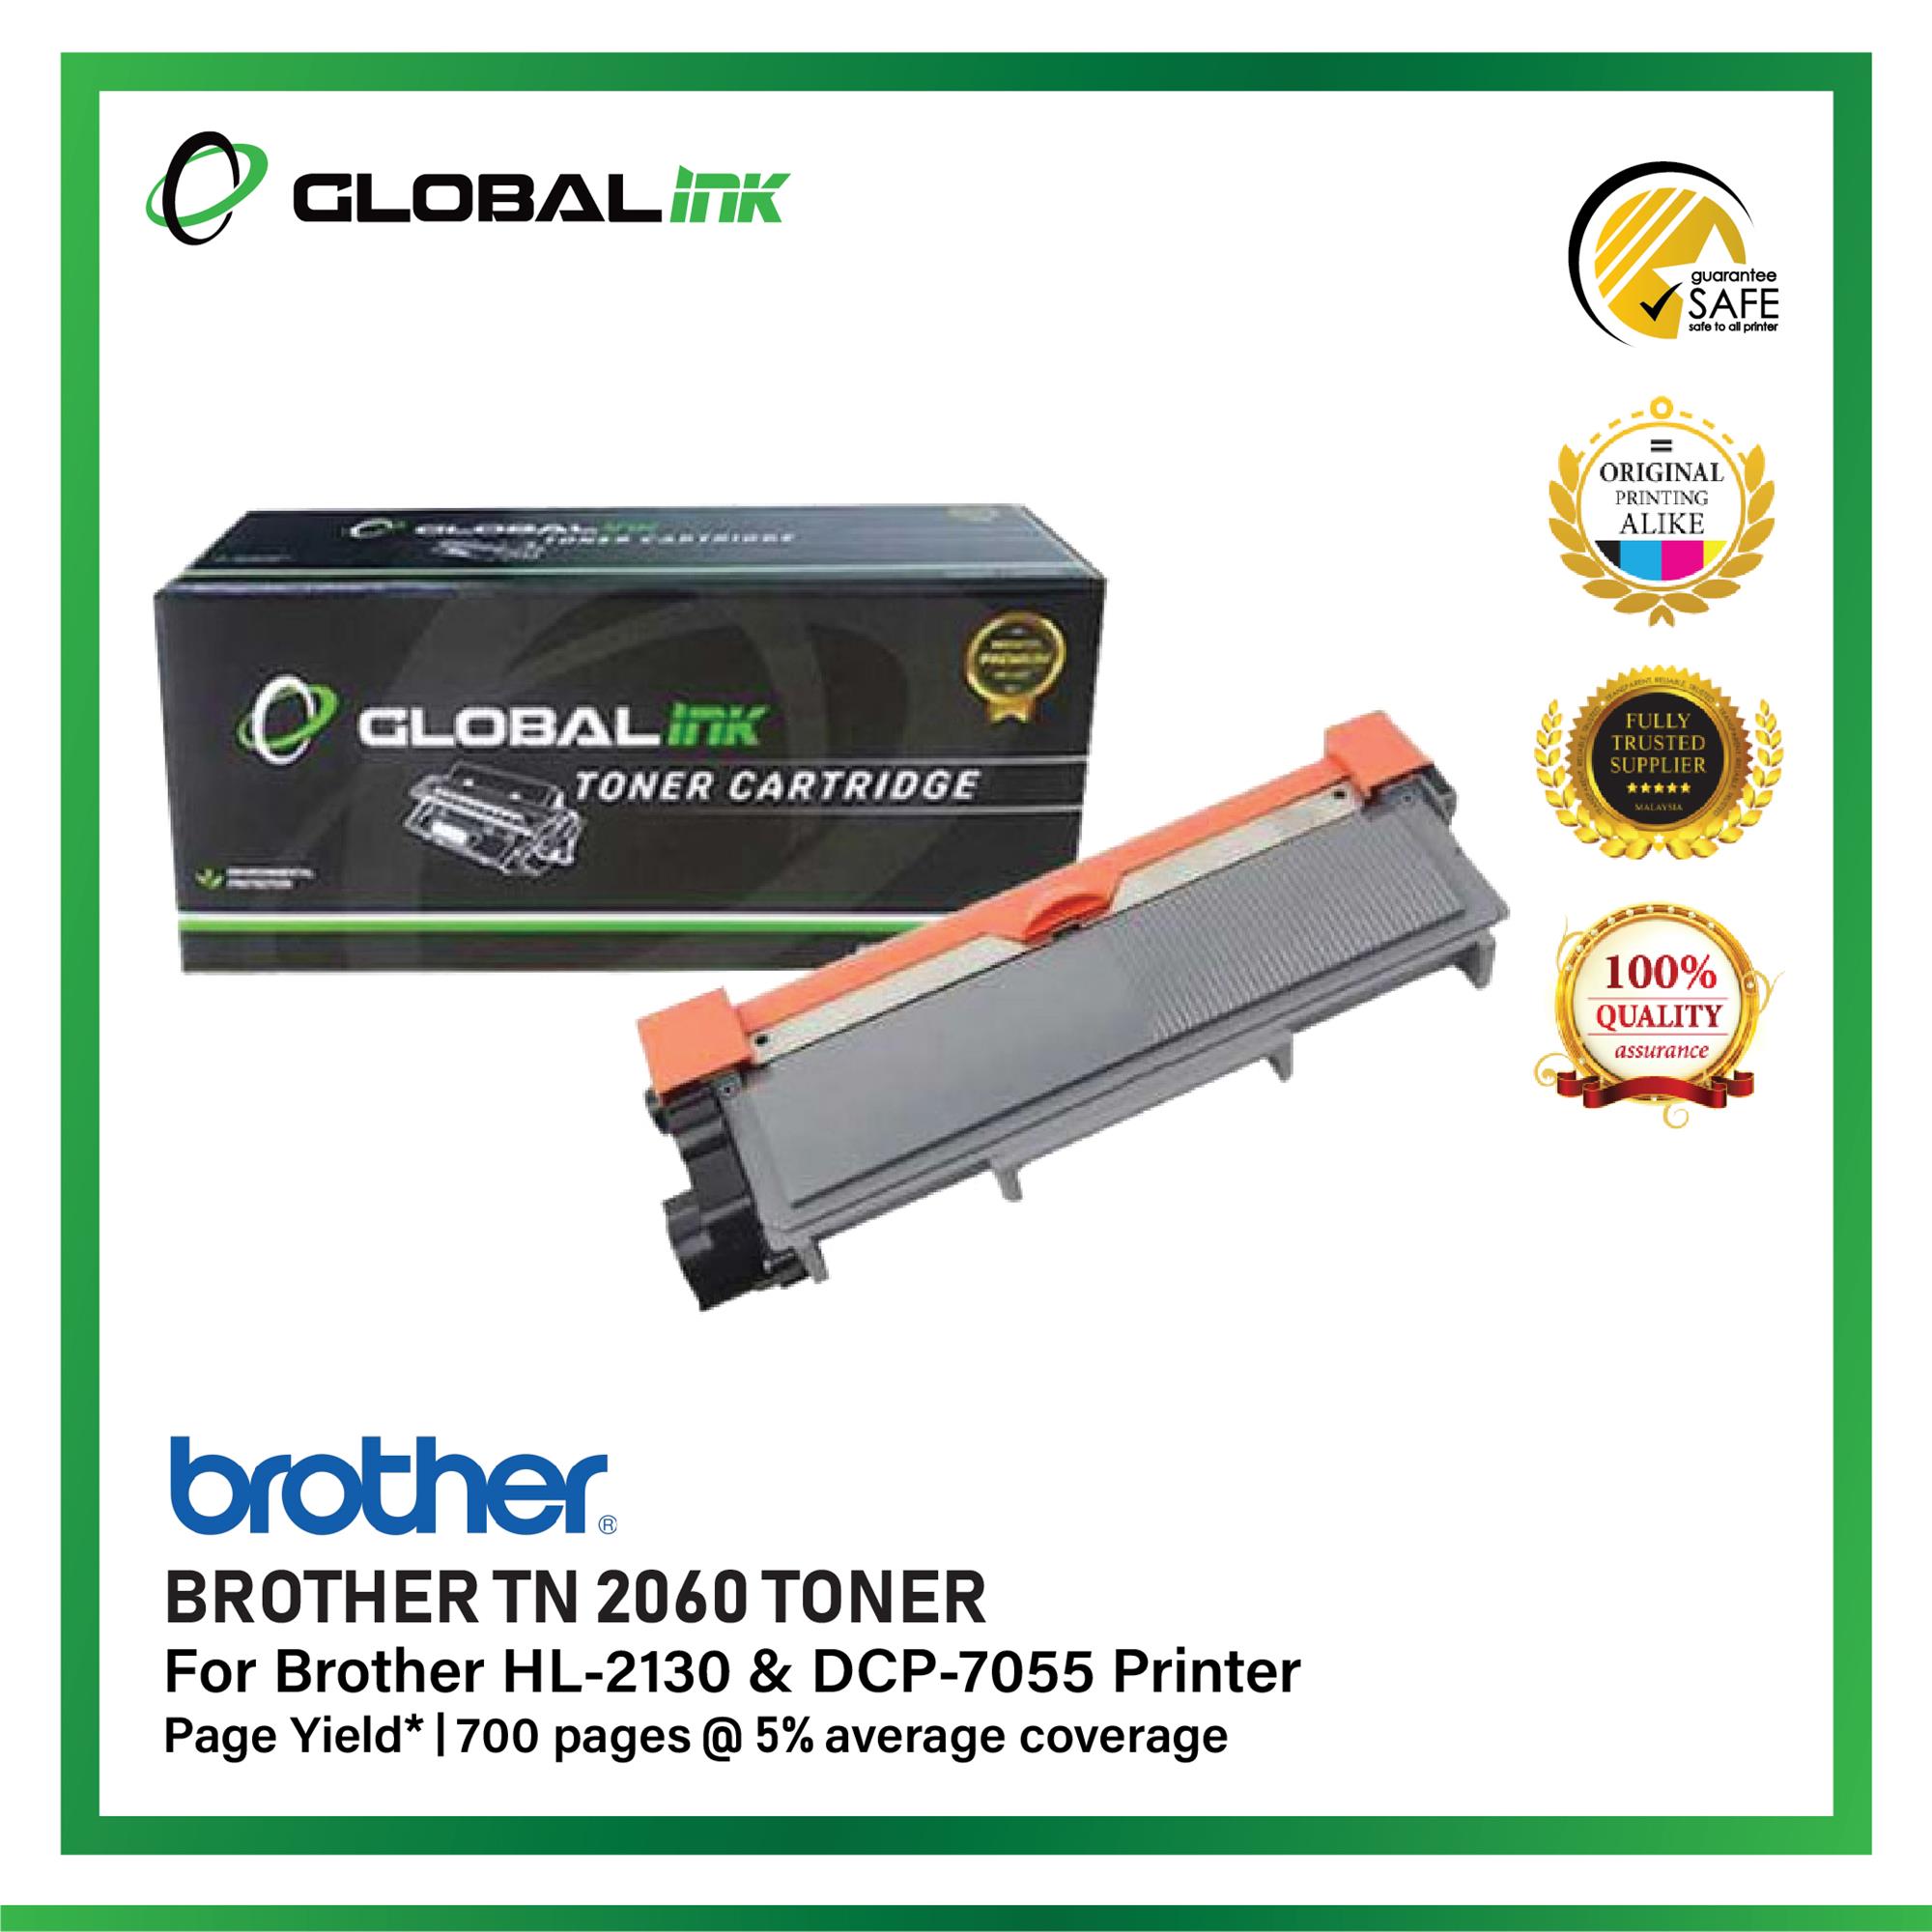 Brother TN 2060 Original Toner Cartridge For Brother DCP 7055, HL 2130